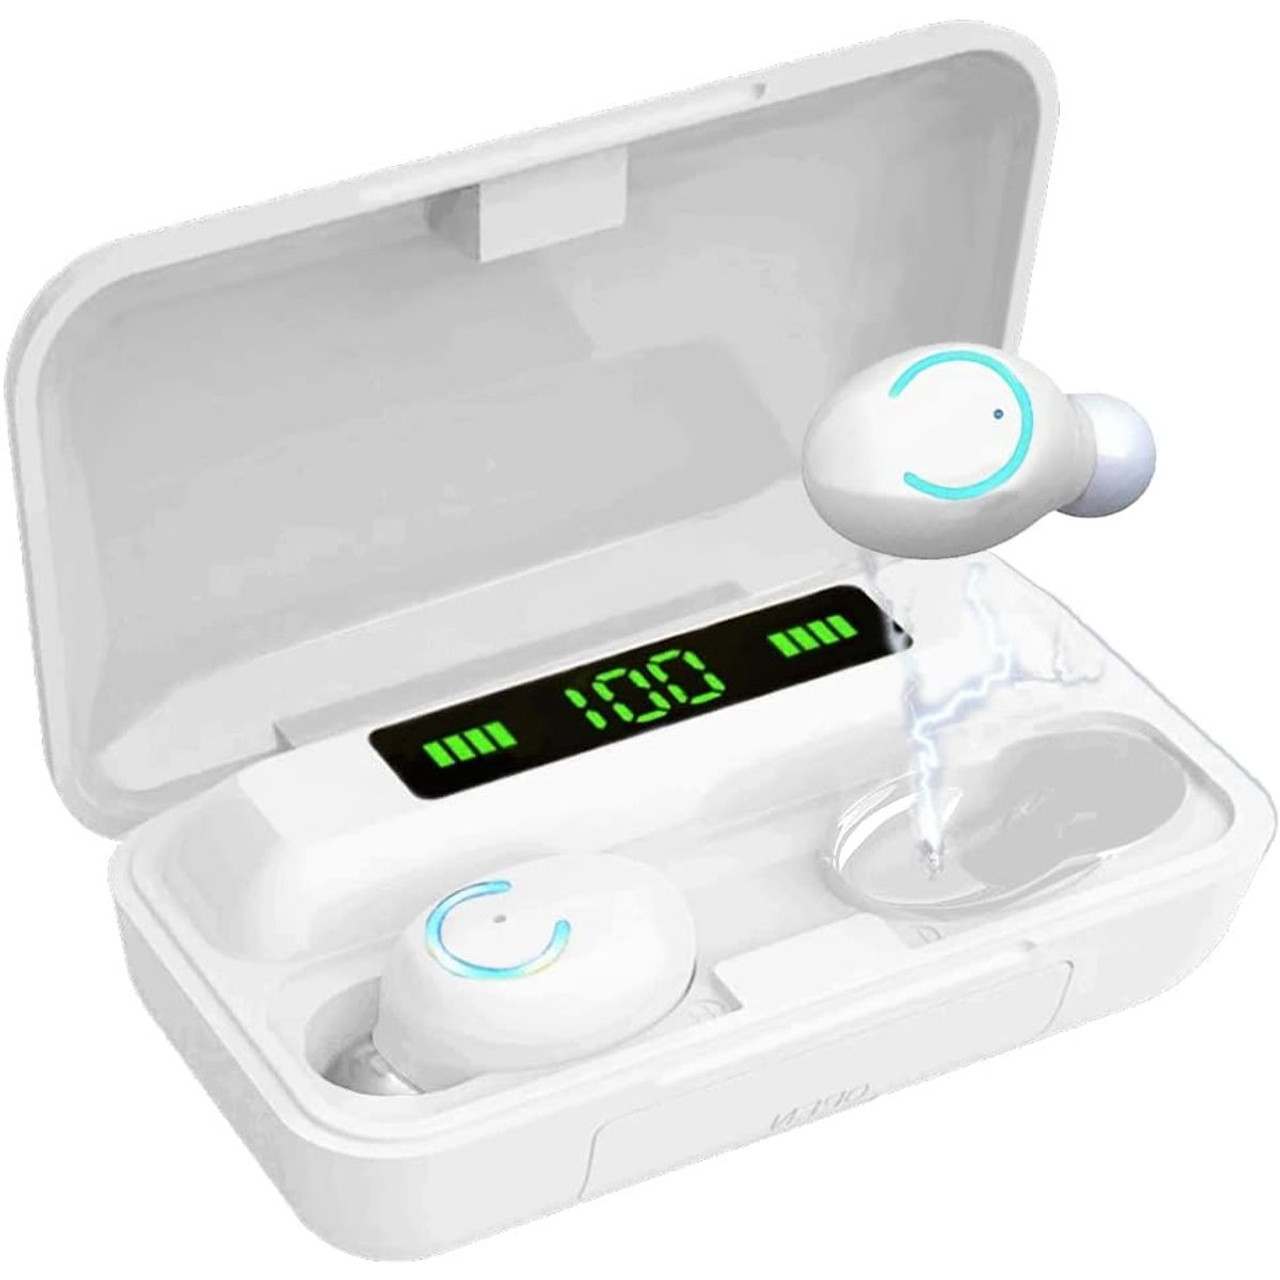 Acuvar™ Wireless BT 5.0 Rechargeable IPX7 Waterproof Earbuds with Case product image